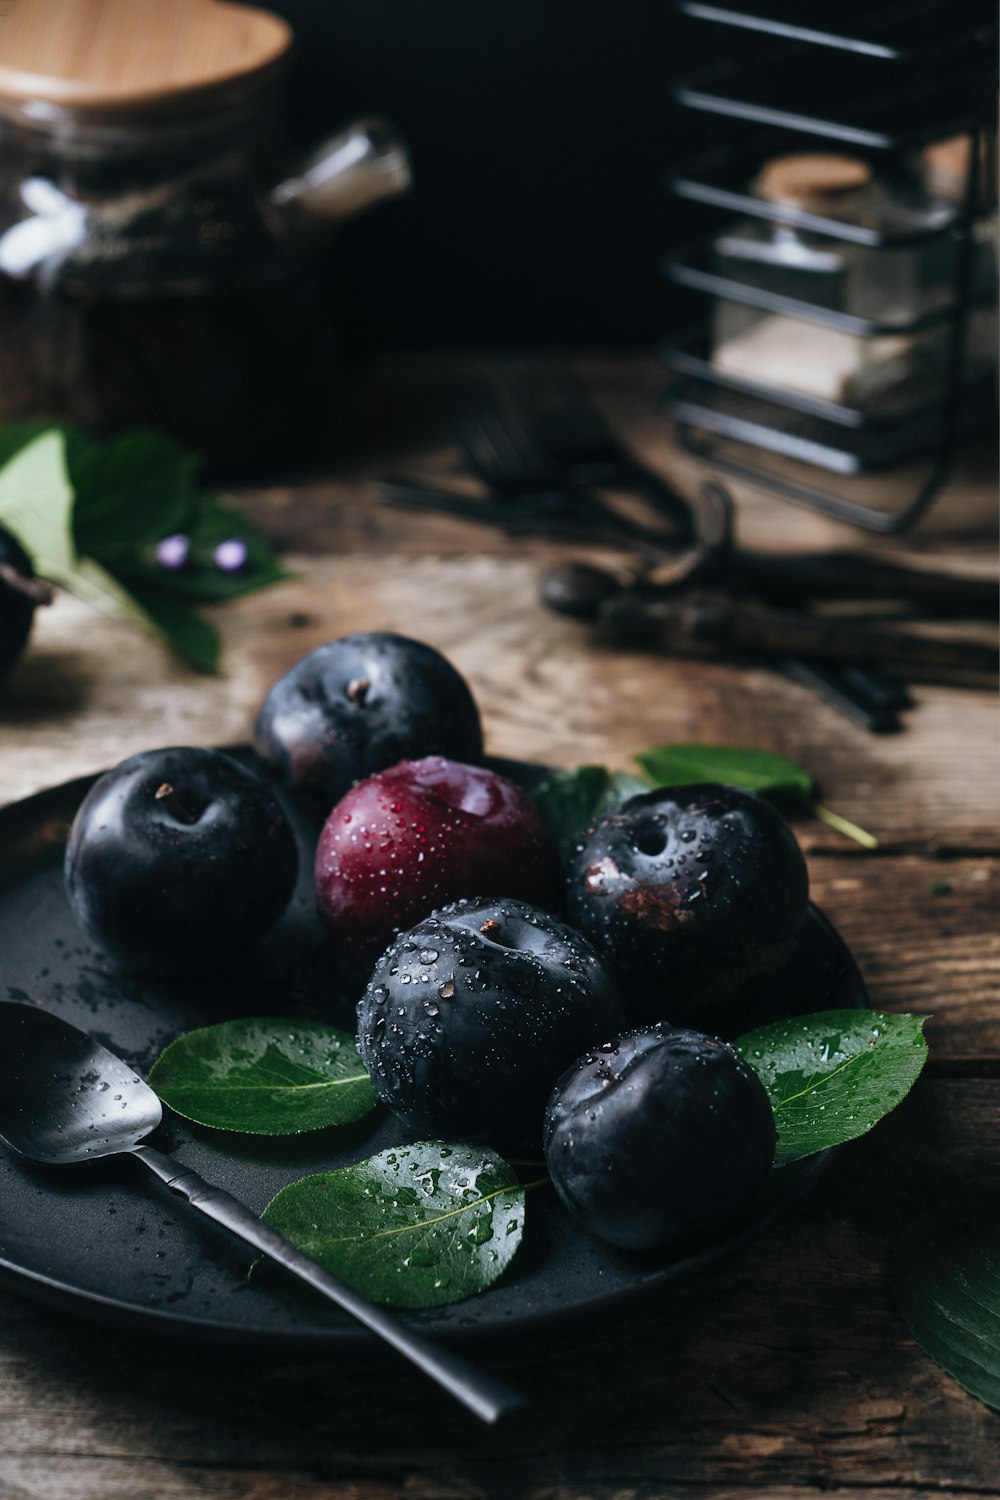 a plate of blueberries and cherries on a wooden table